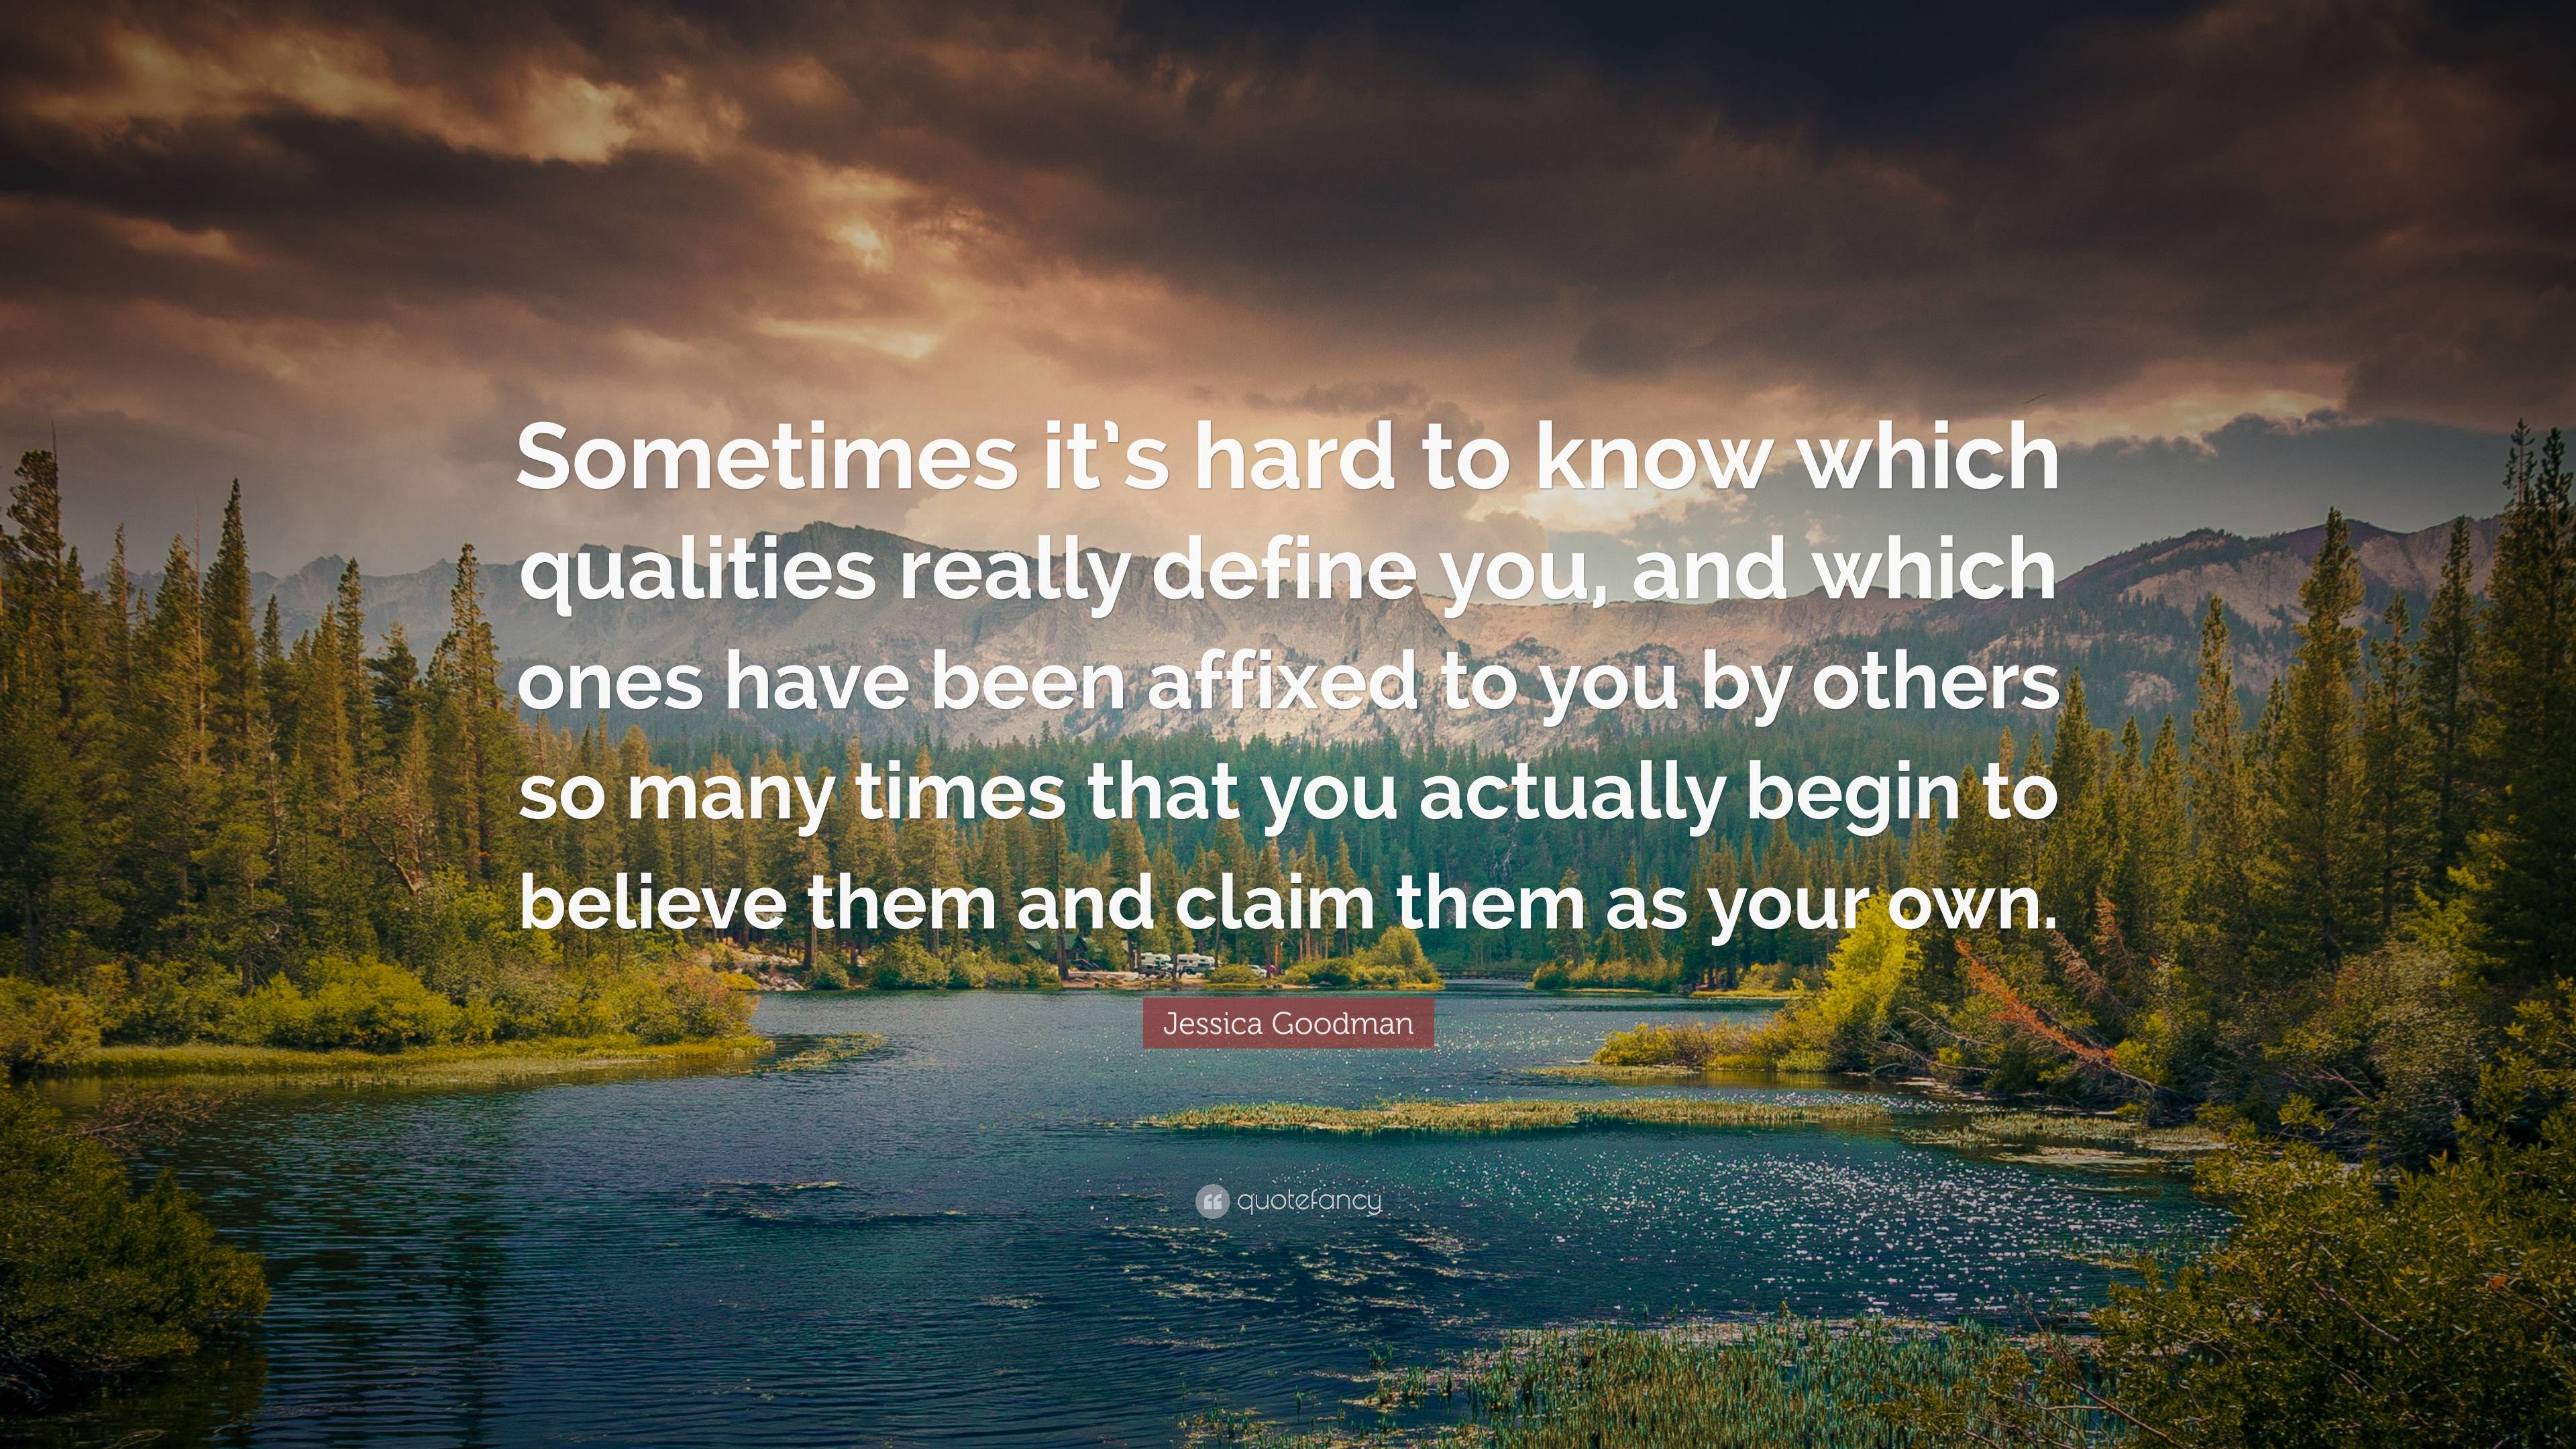 Jessica Goodman Quote: “Sometimes it’s hard to know which qualities ...